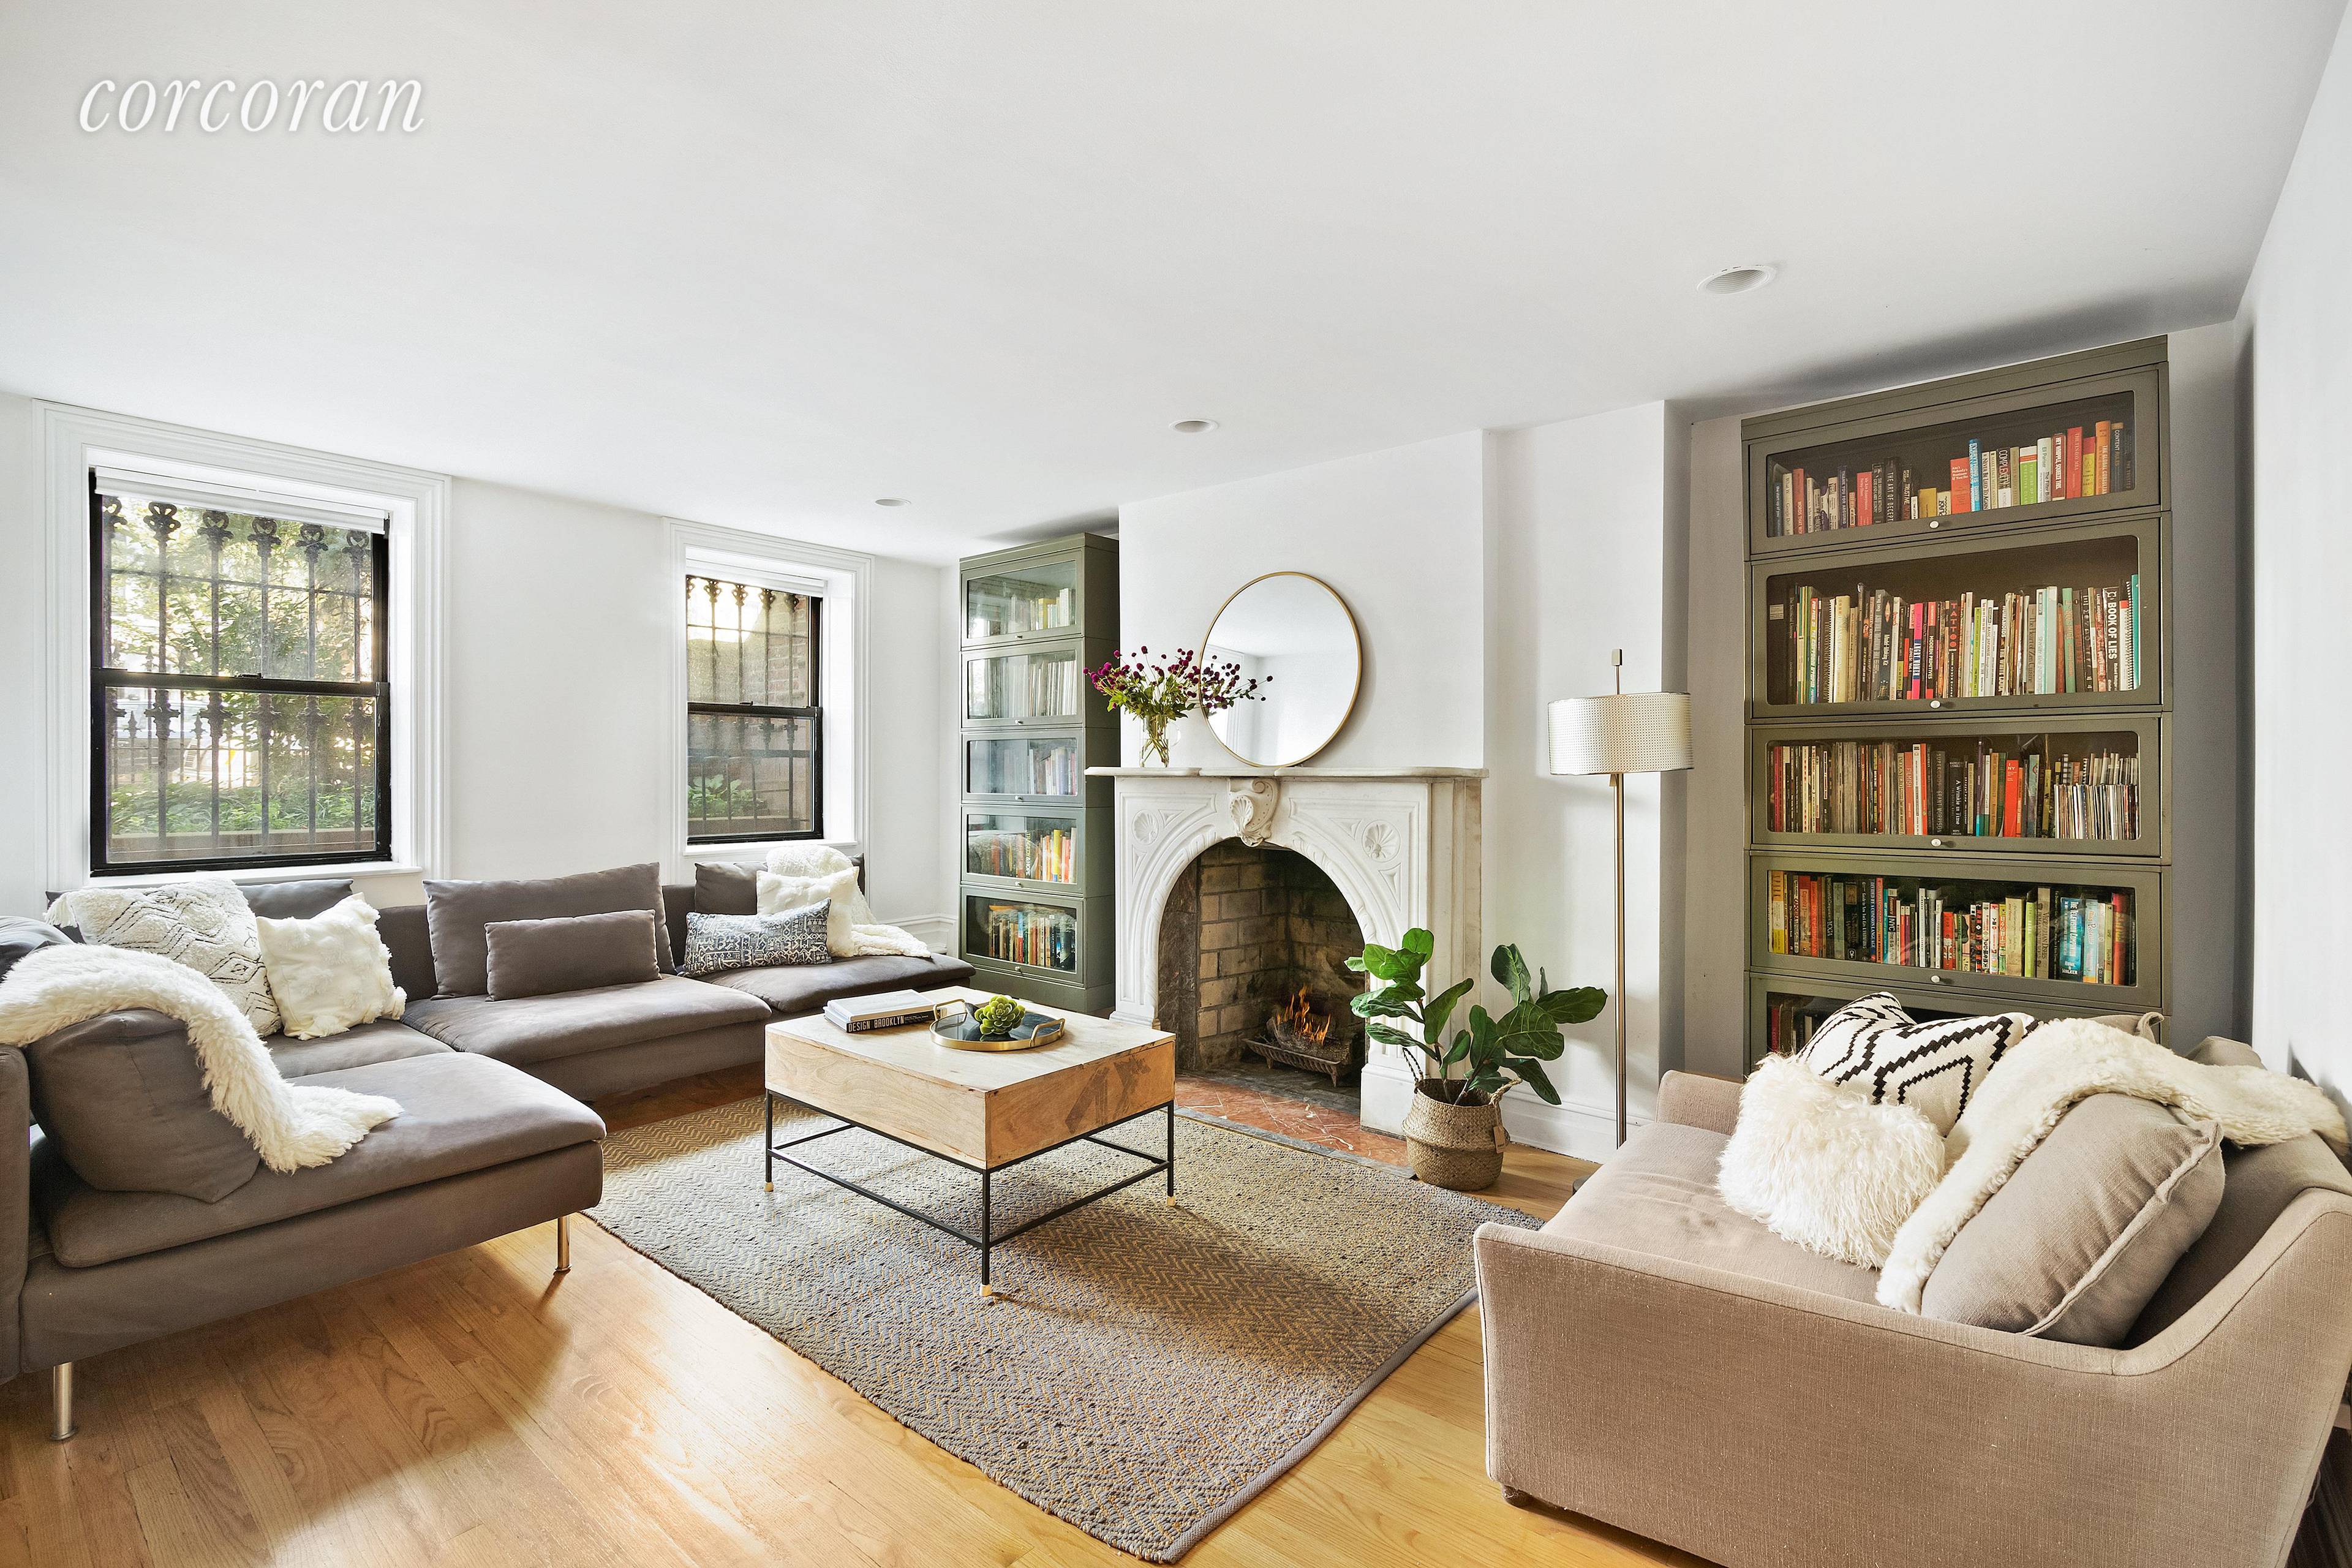 486 Warren StreetThis beautifully maintained Boerum Hill townhome is the perfect live invest property.